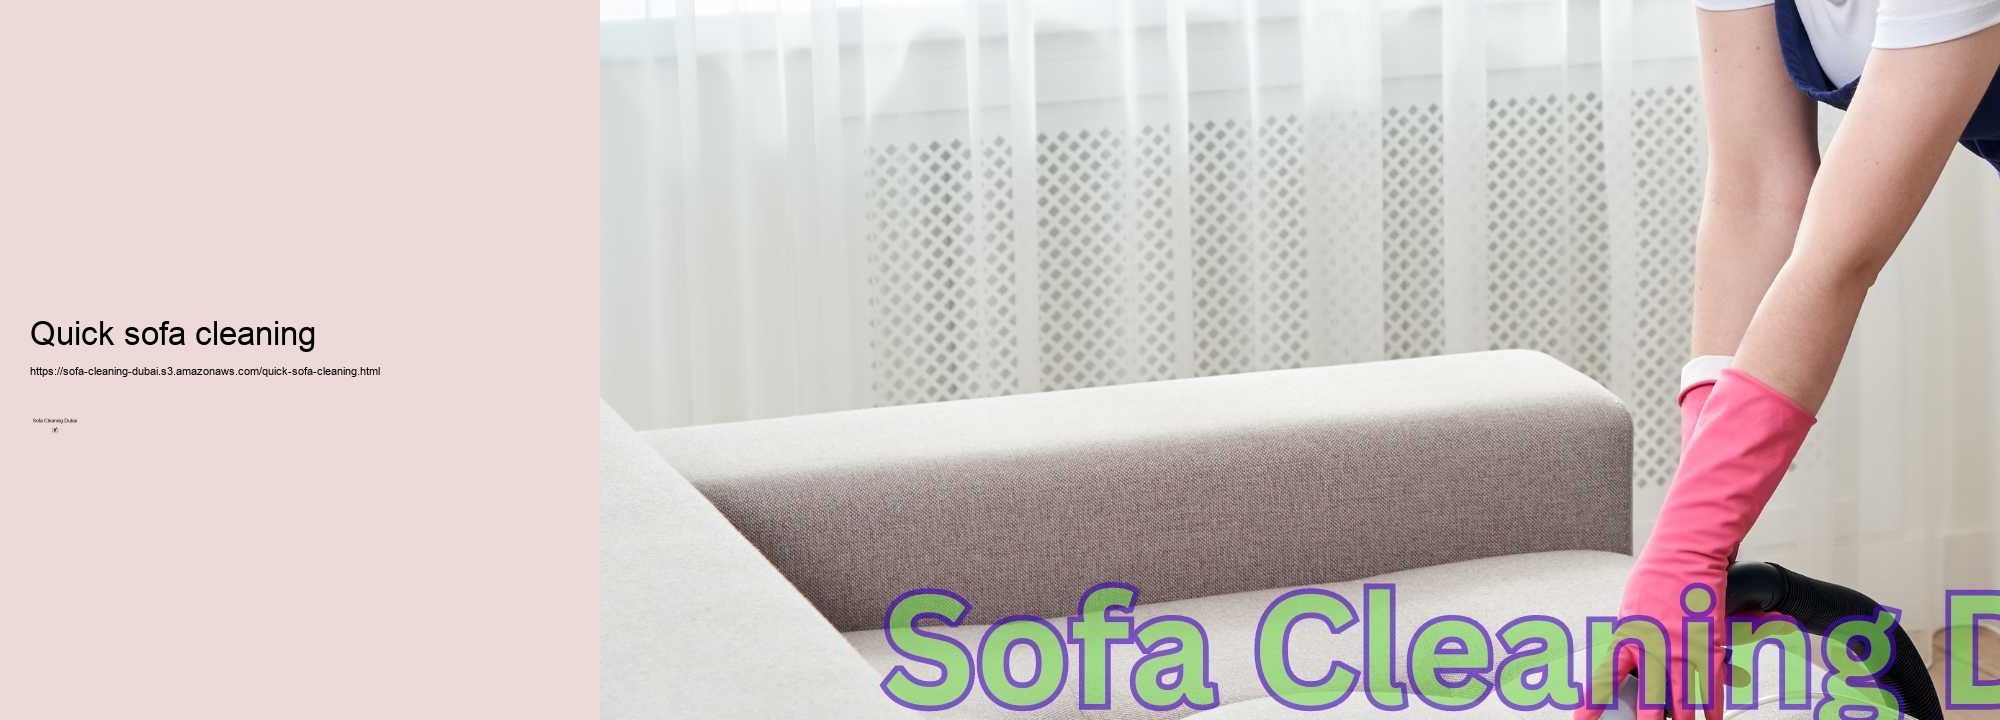 Quick sofa cleaning